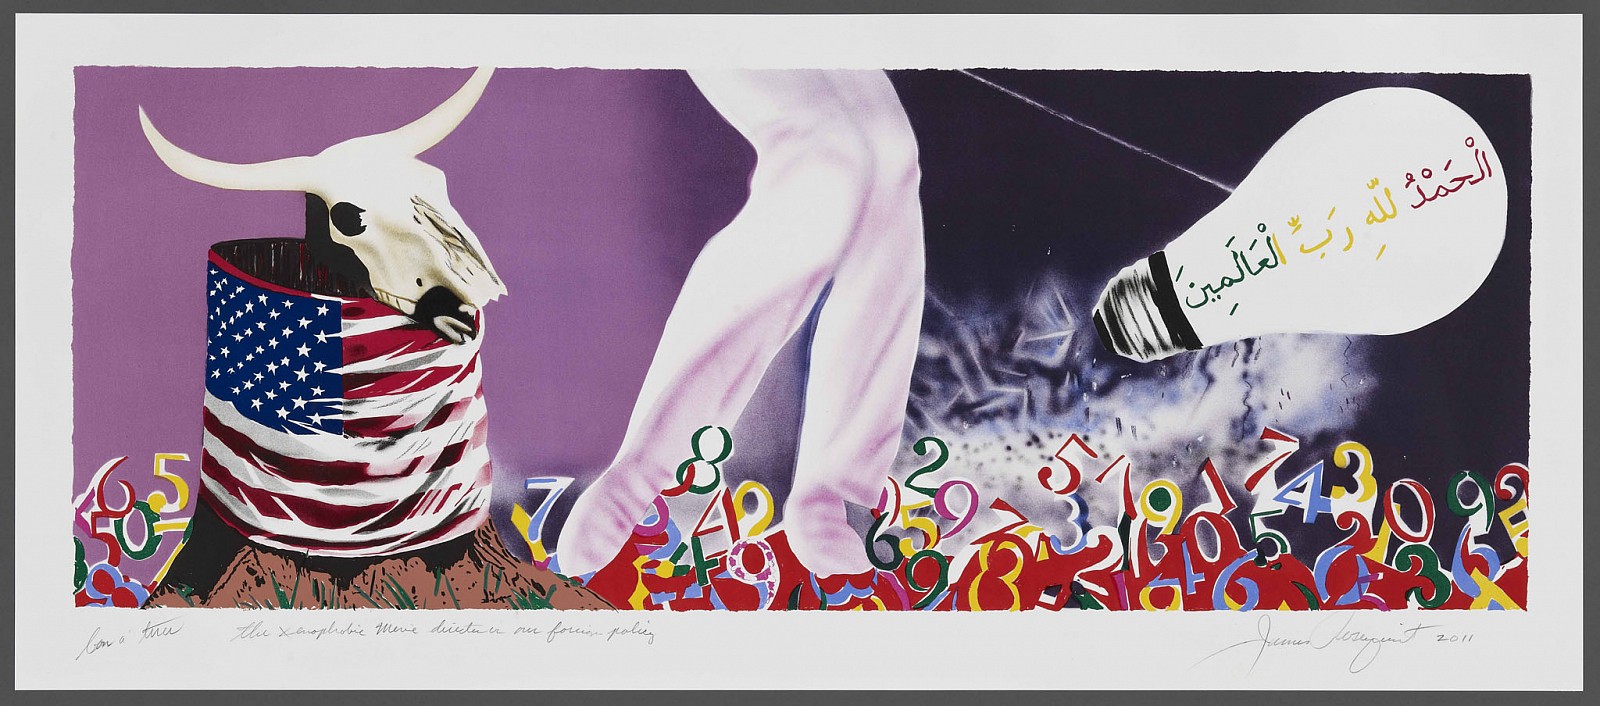 James Rosenquist, The Xenophobic Movie Director or Our Foreign Policy, 2011
15-Color Lithograph, 25 x 58 inches